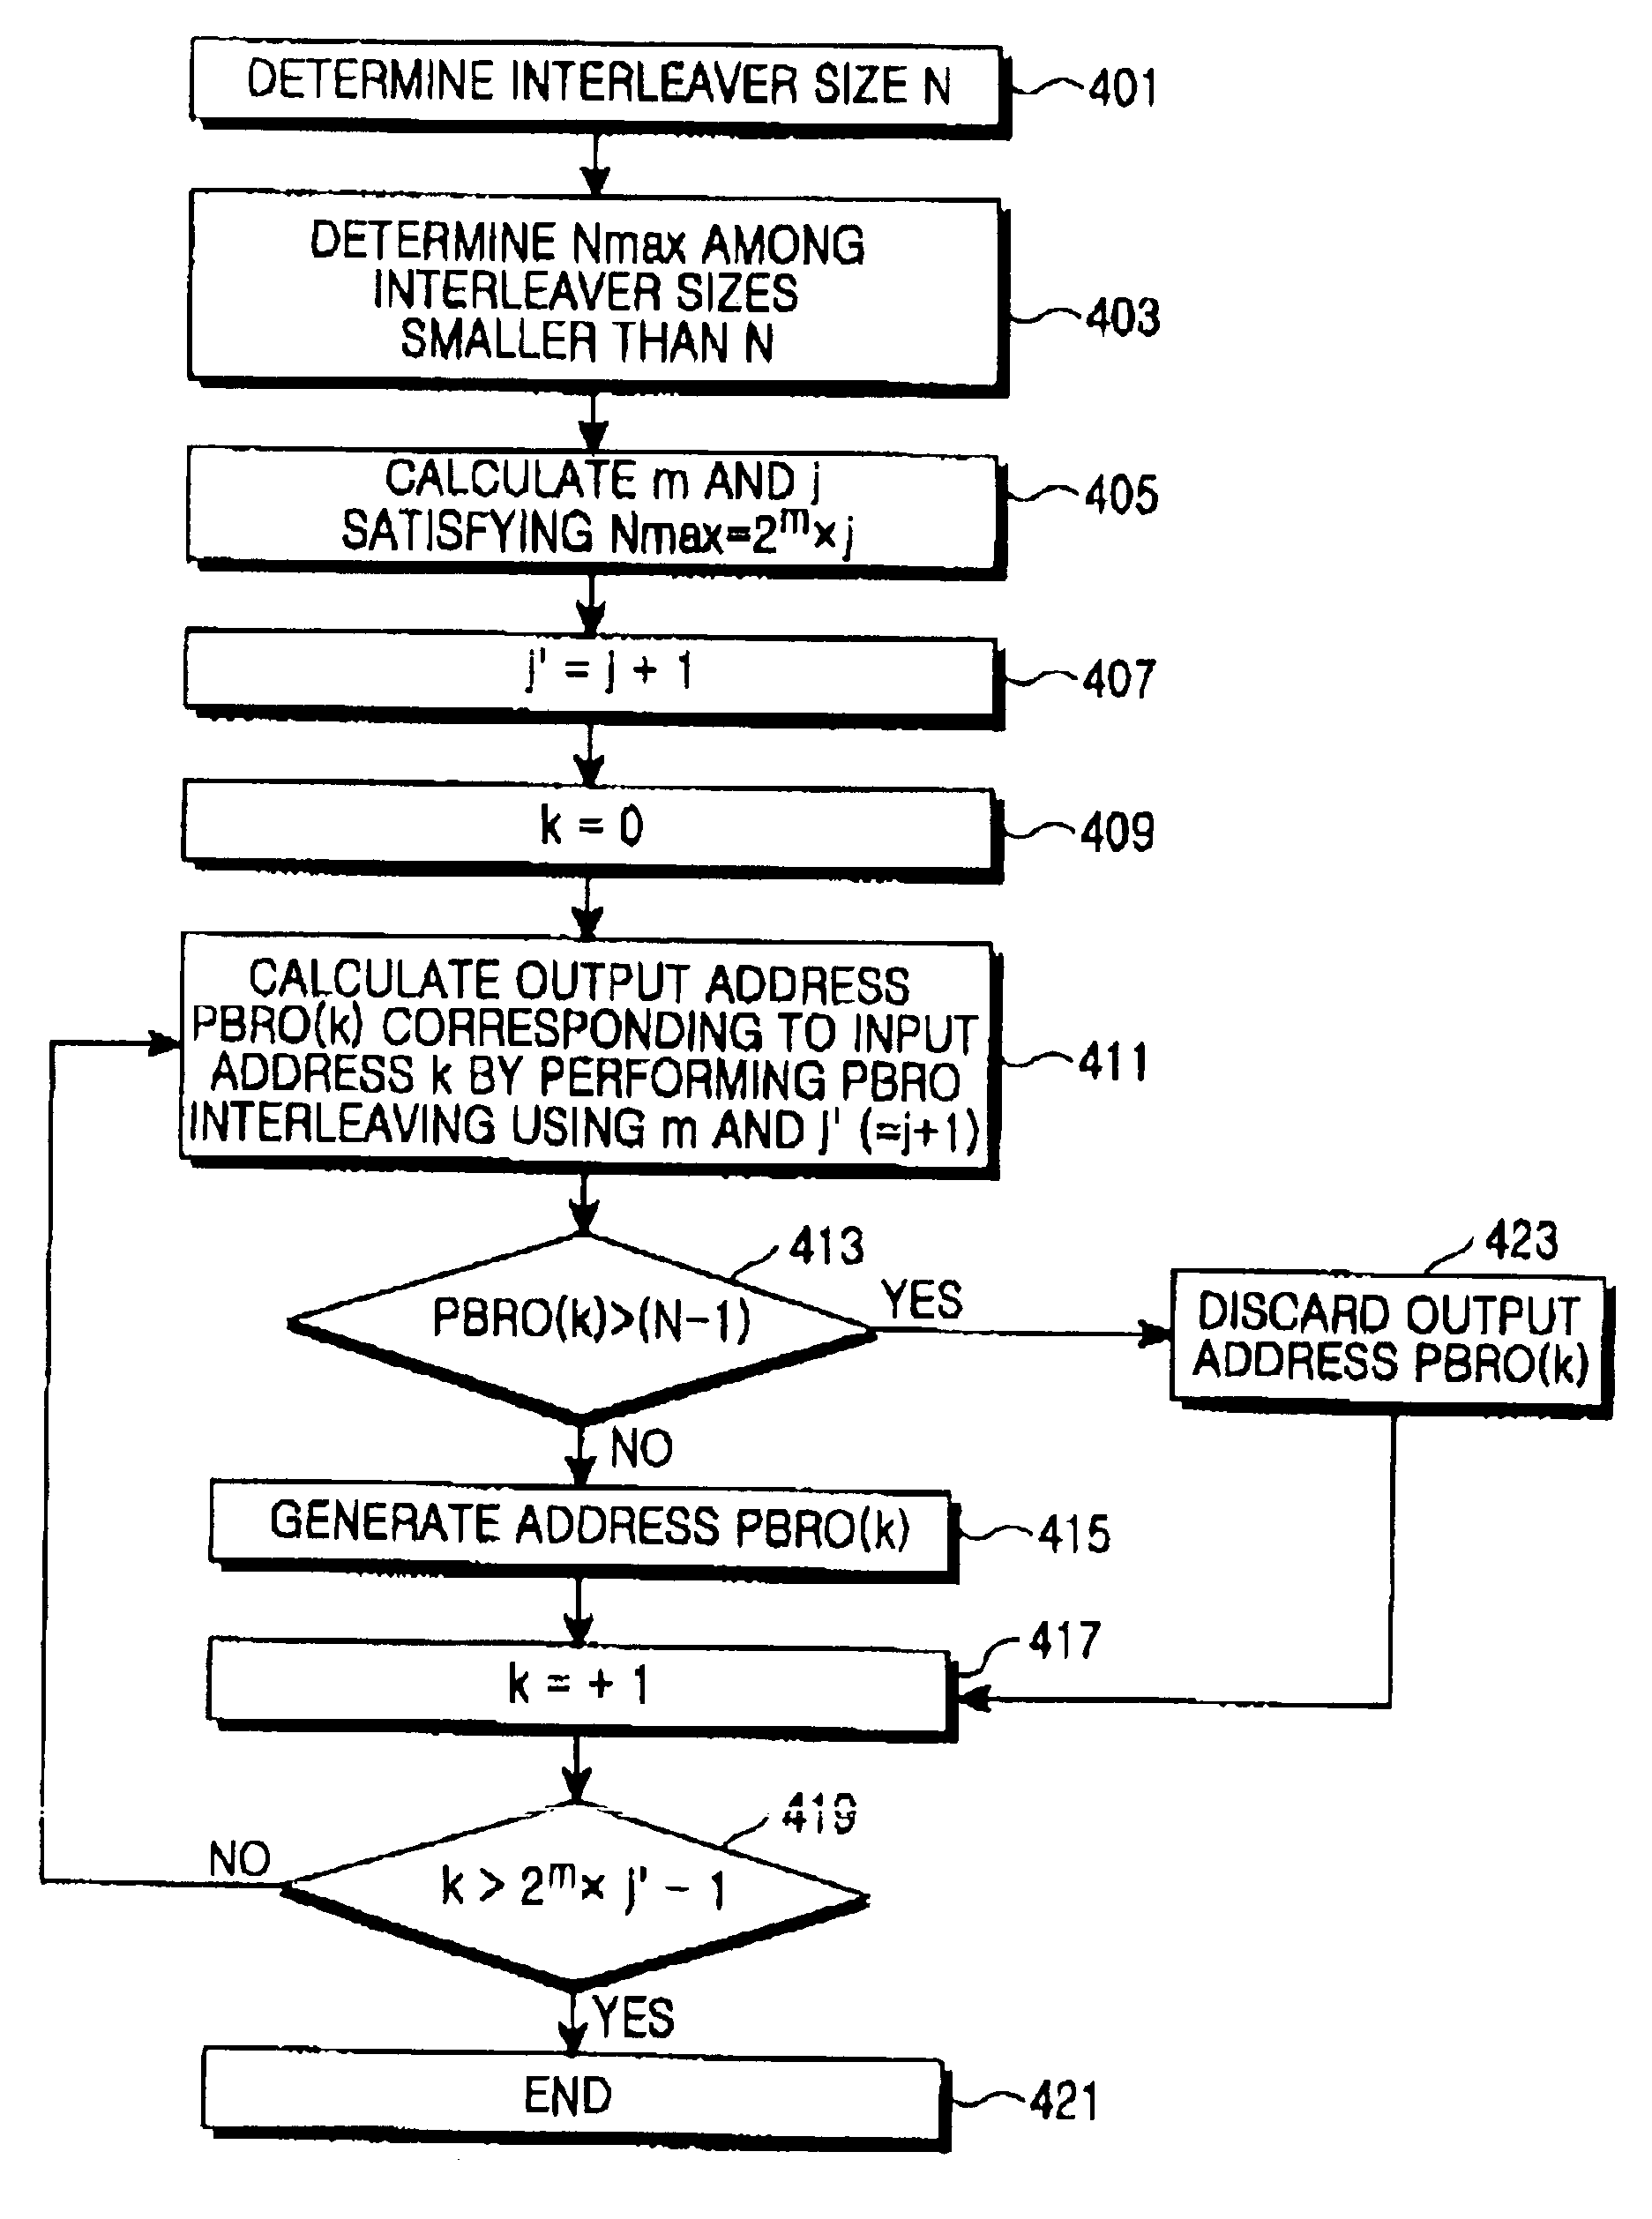 Interleaving apparatus and method for a communication system